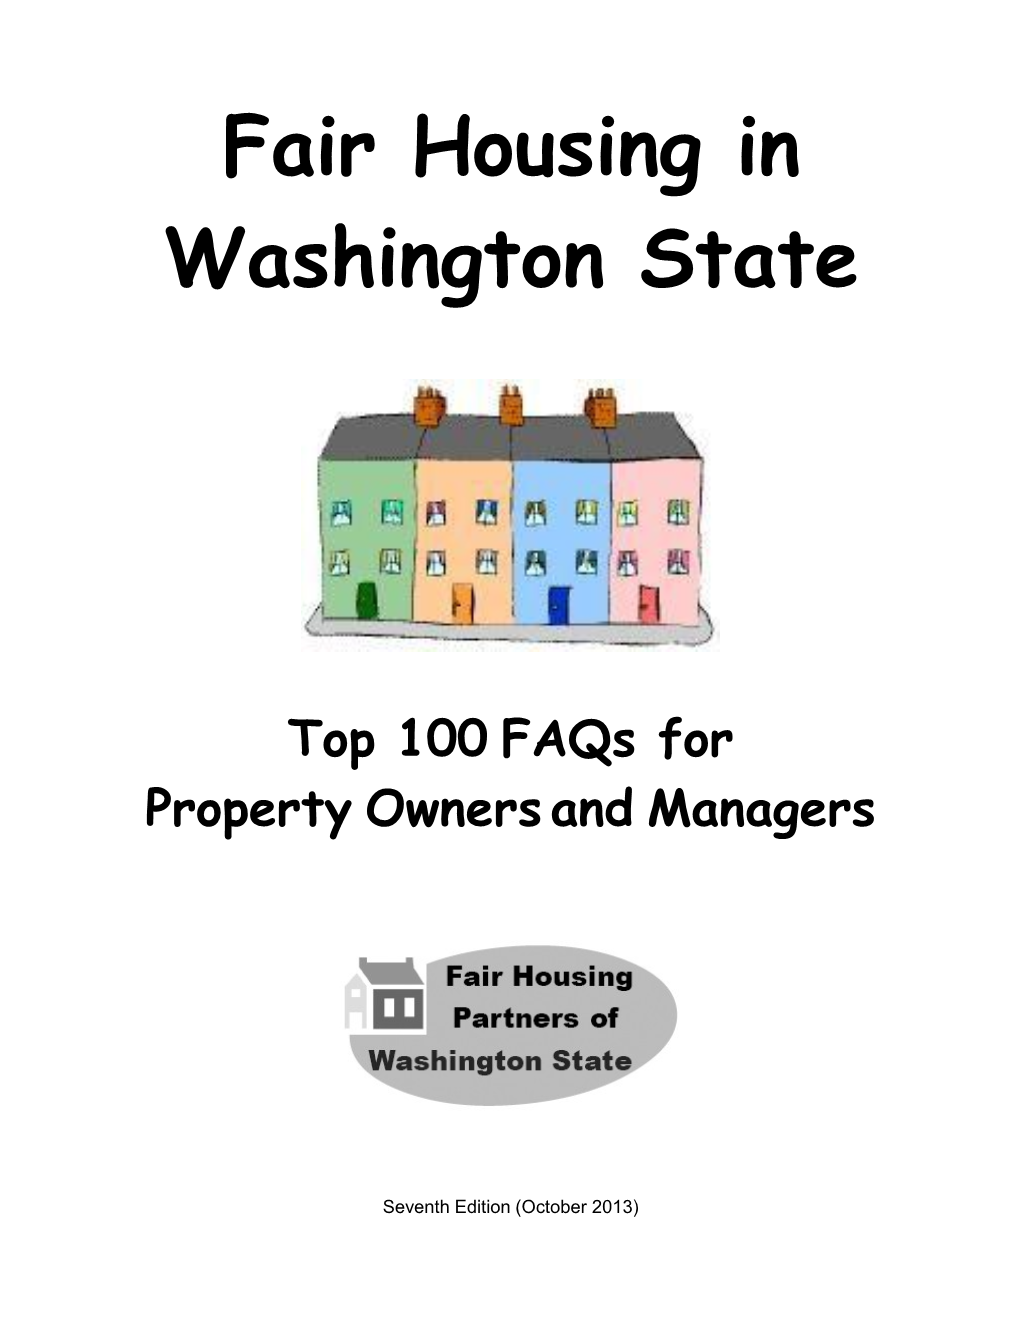 Fair Housing in Washington State for Property Owners and Managers